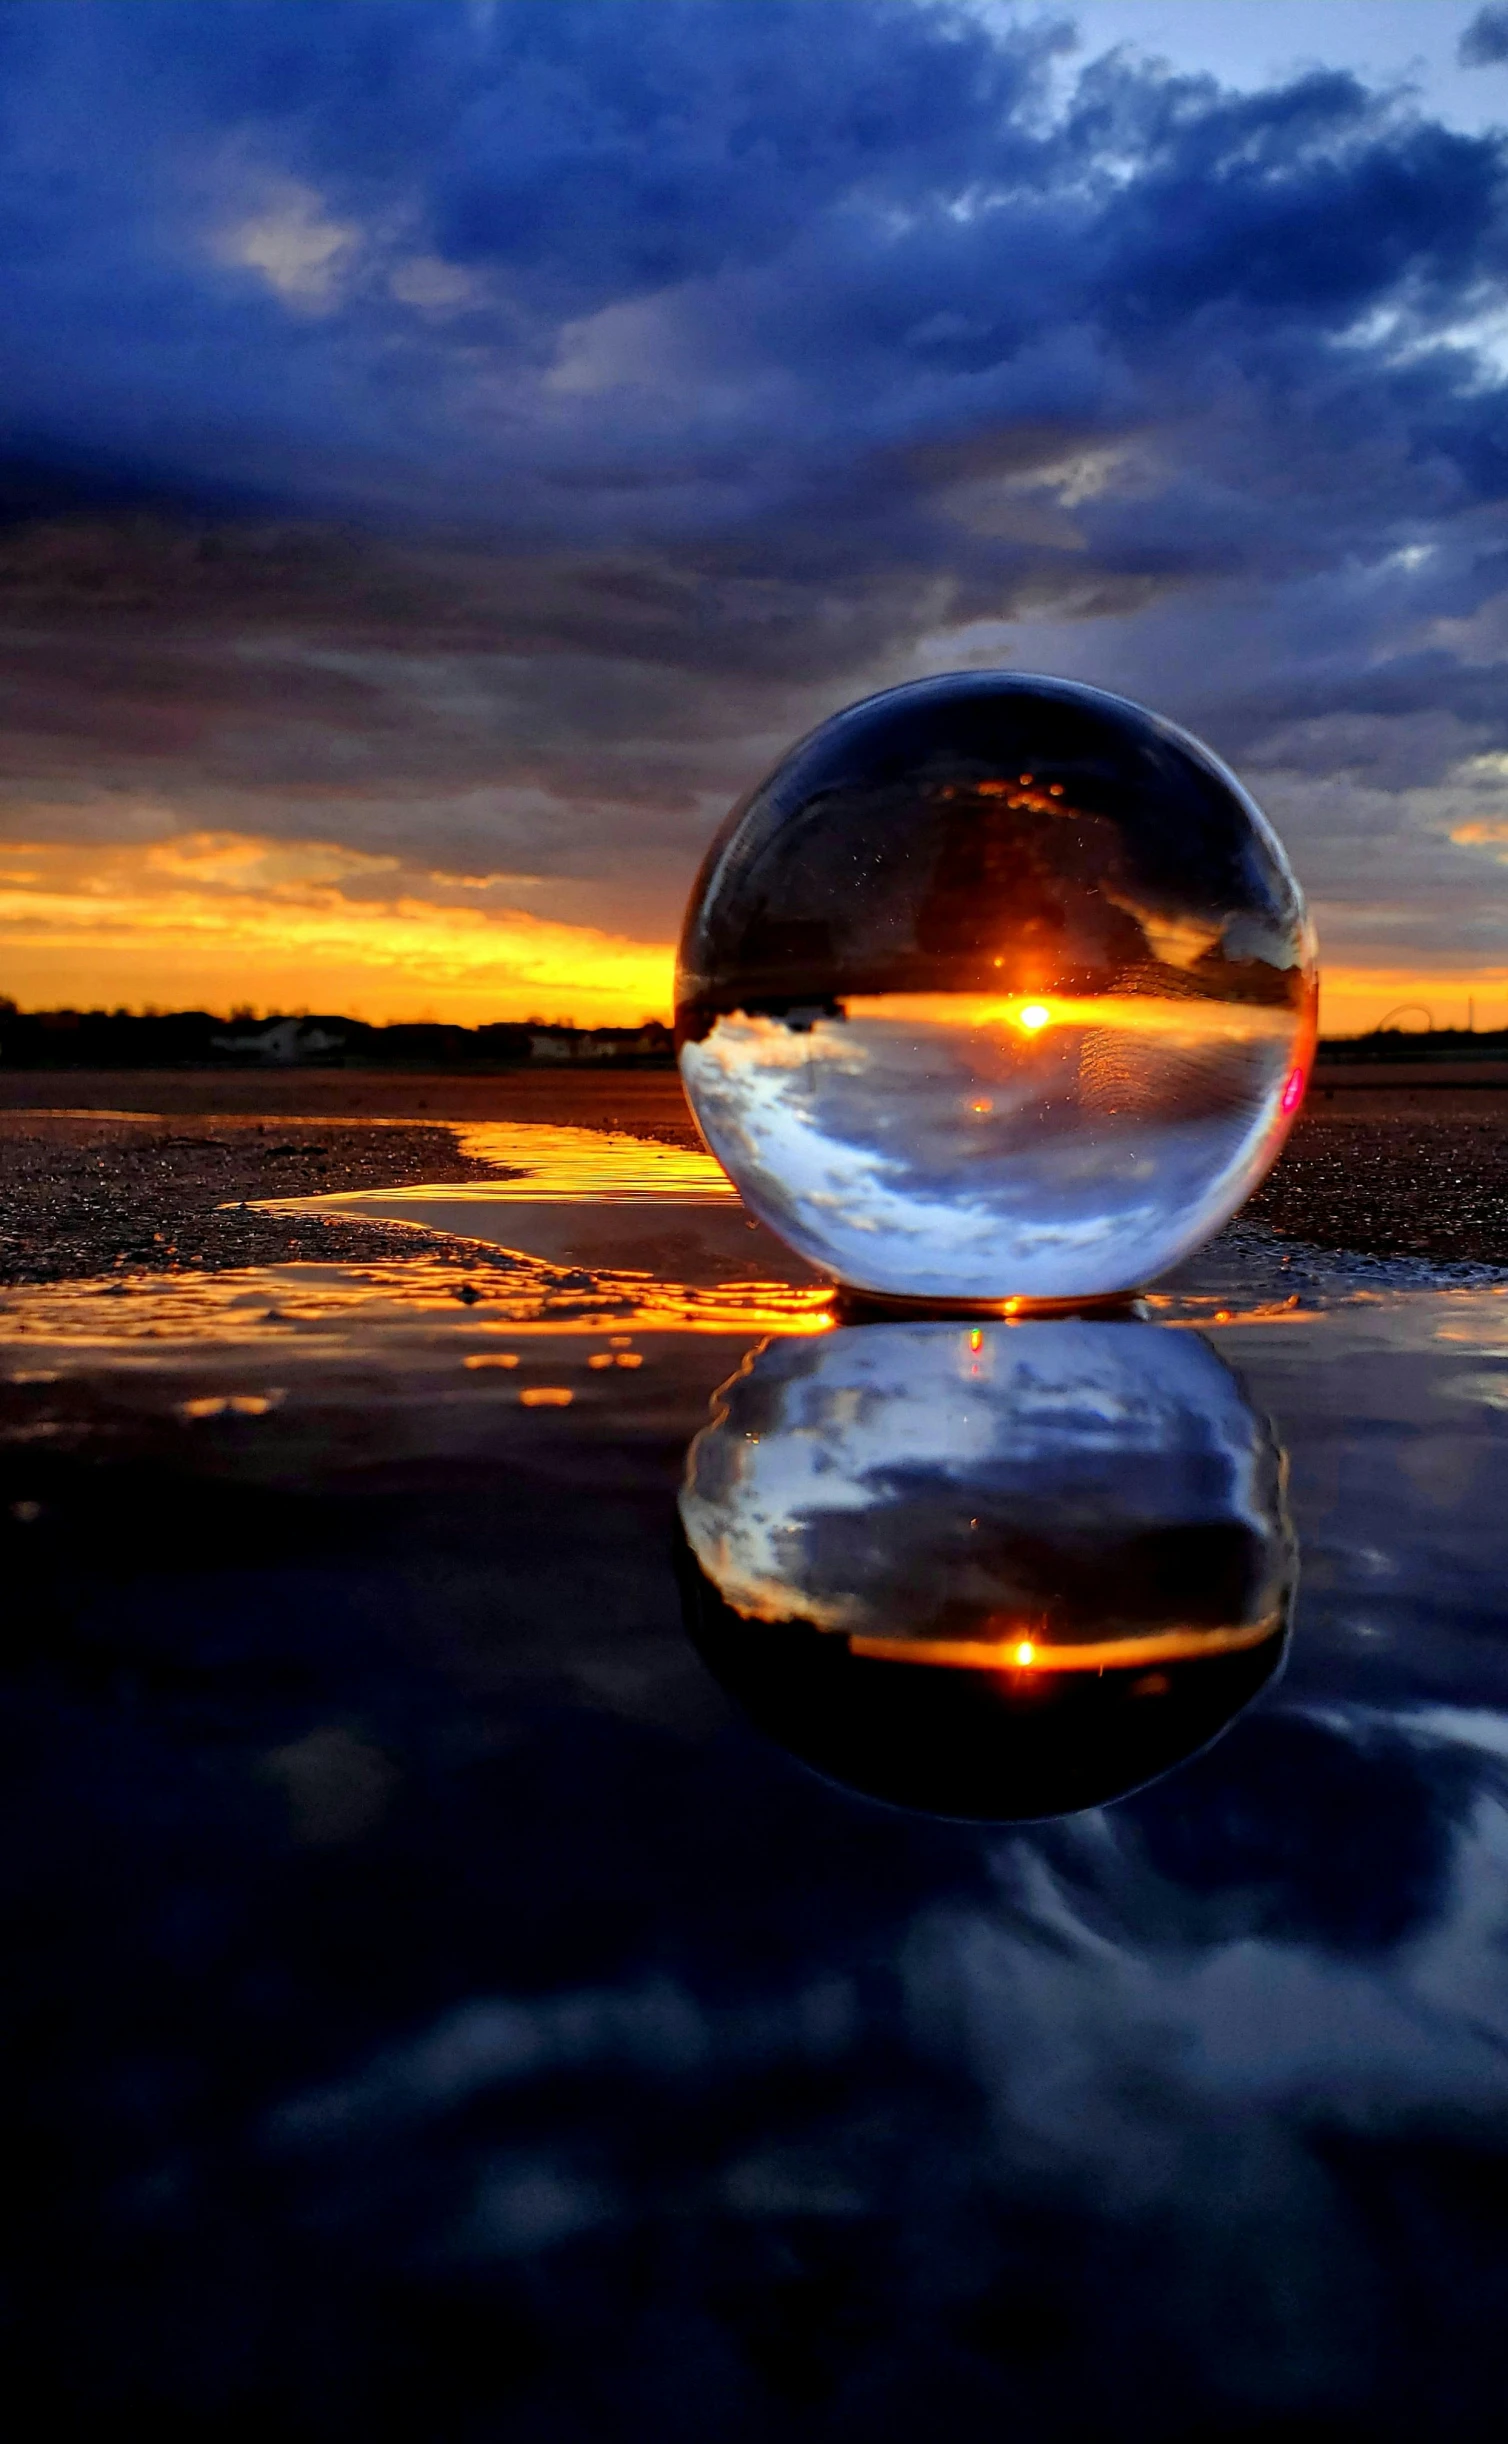 the sky is shown behind a large mirror ball